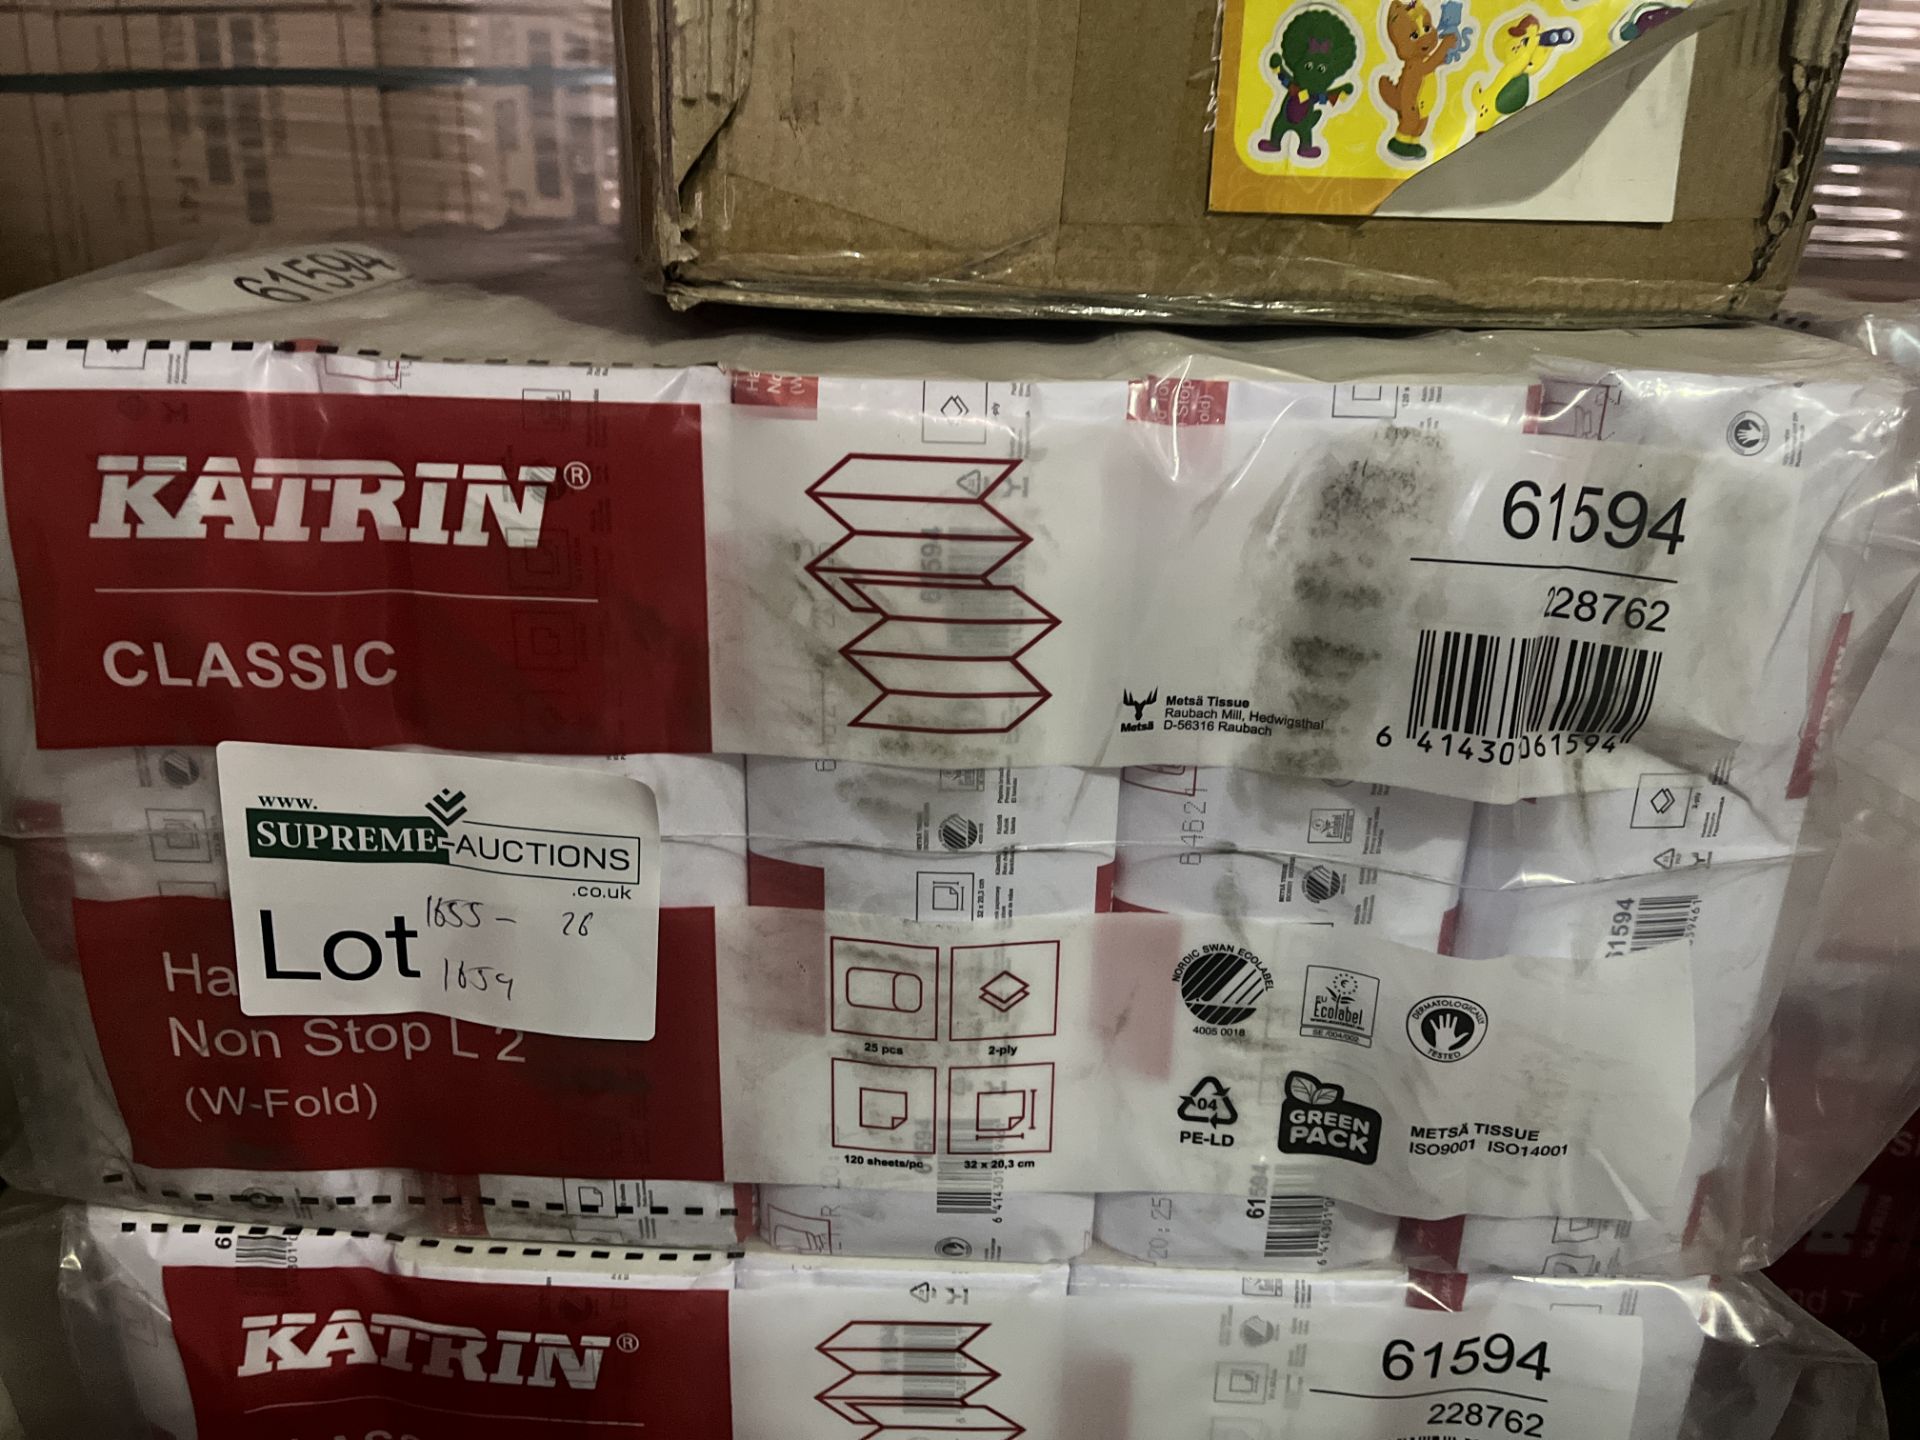 4 X BRAND NEW PACKS OF KATRIN 61594 CLASSIC NON STOP HAND TOWELS RRP £55 EACH R15